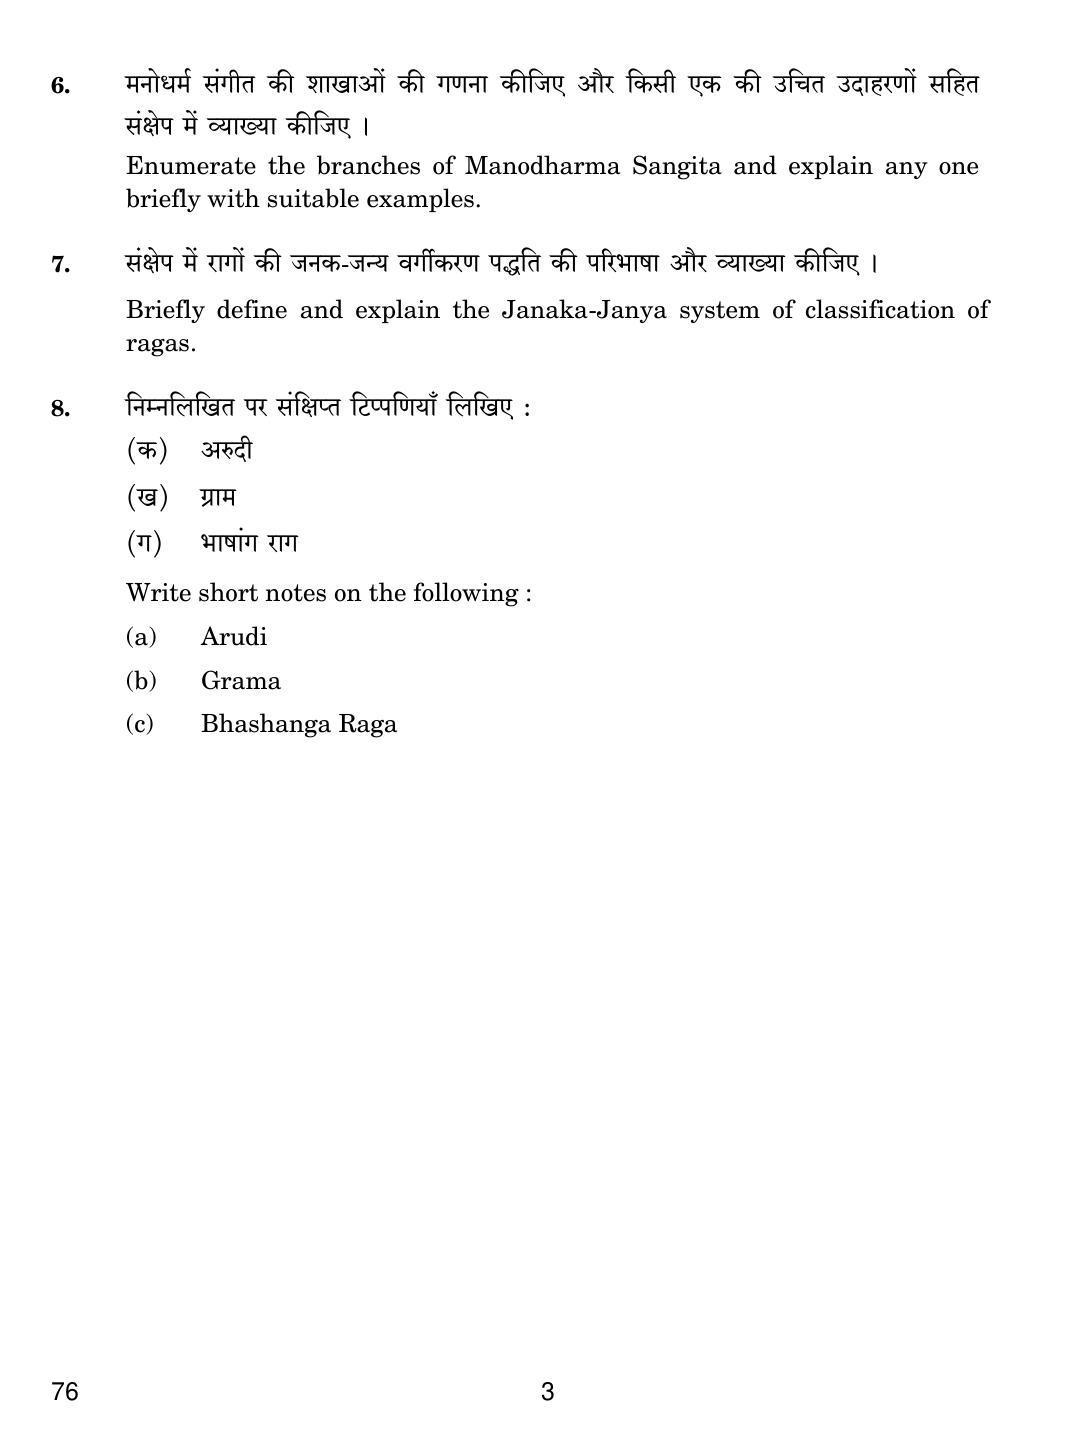 CBSE Class 12 76 Carnatic Music 2019 Question Paper - Page 3